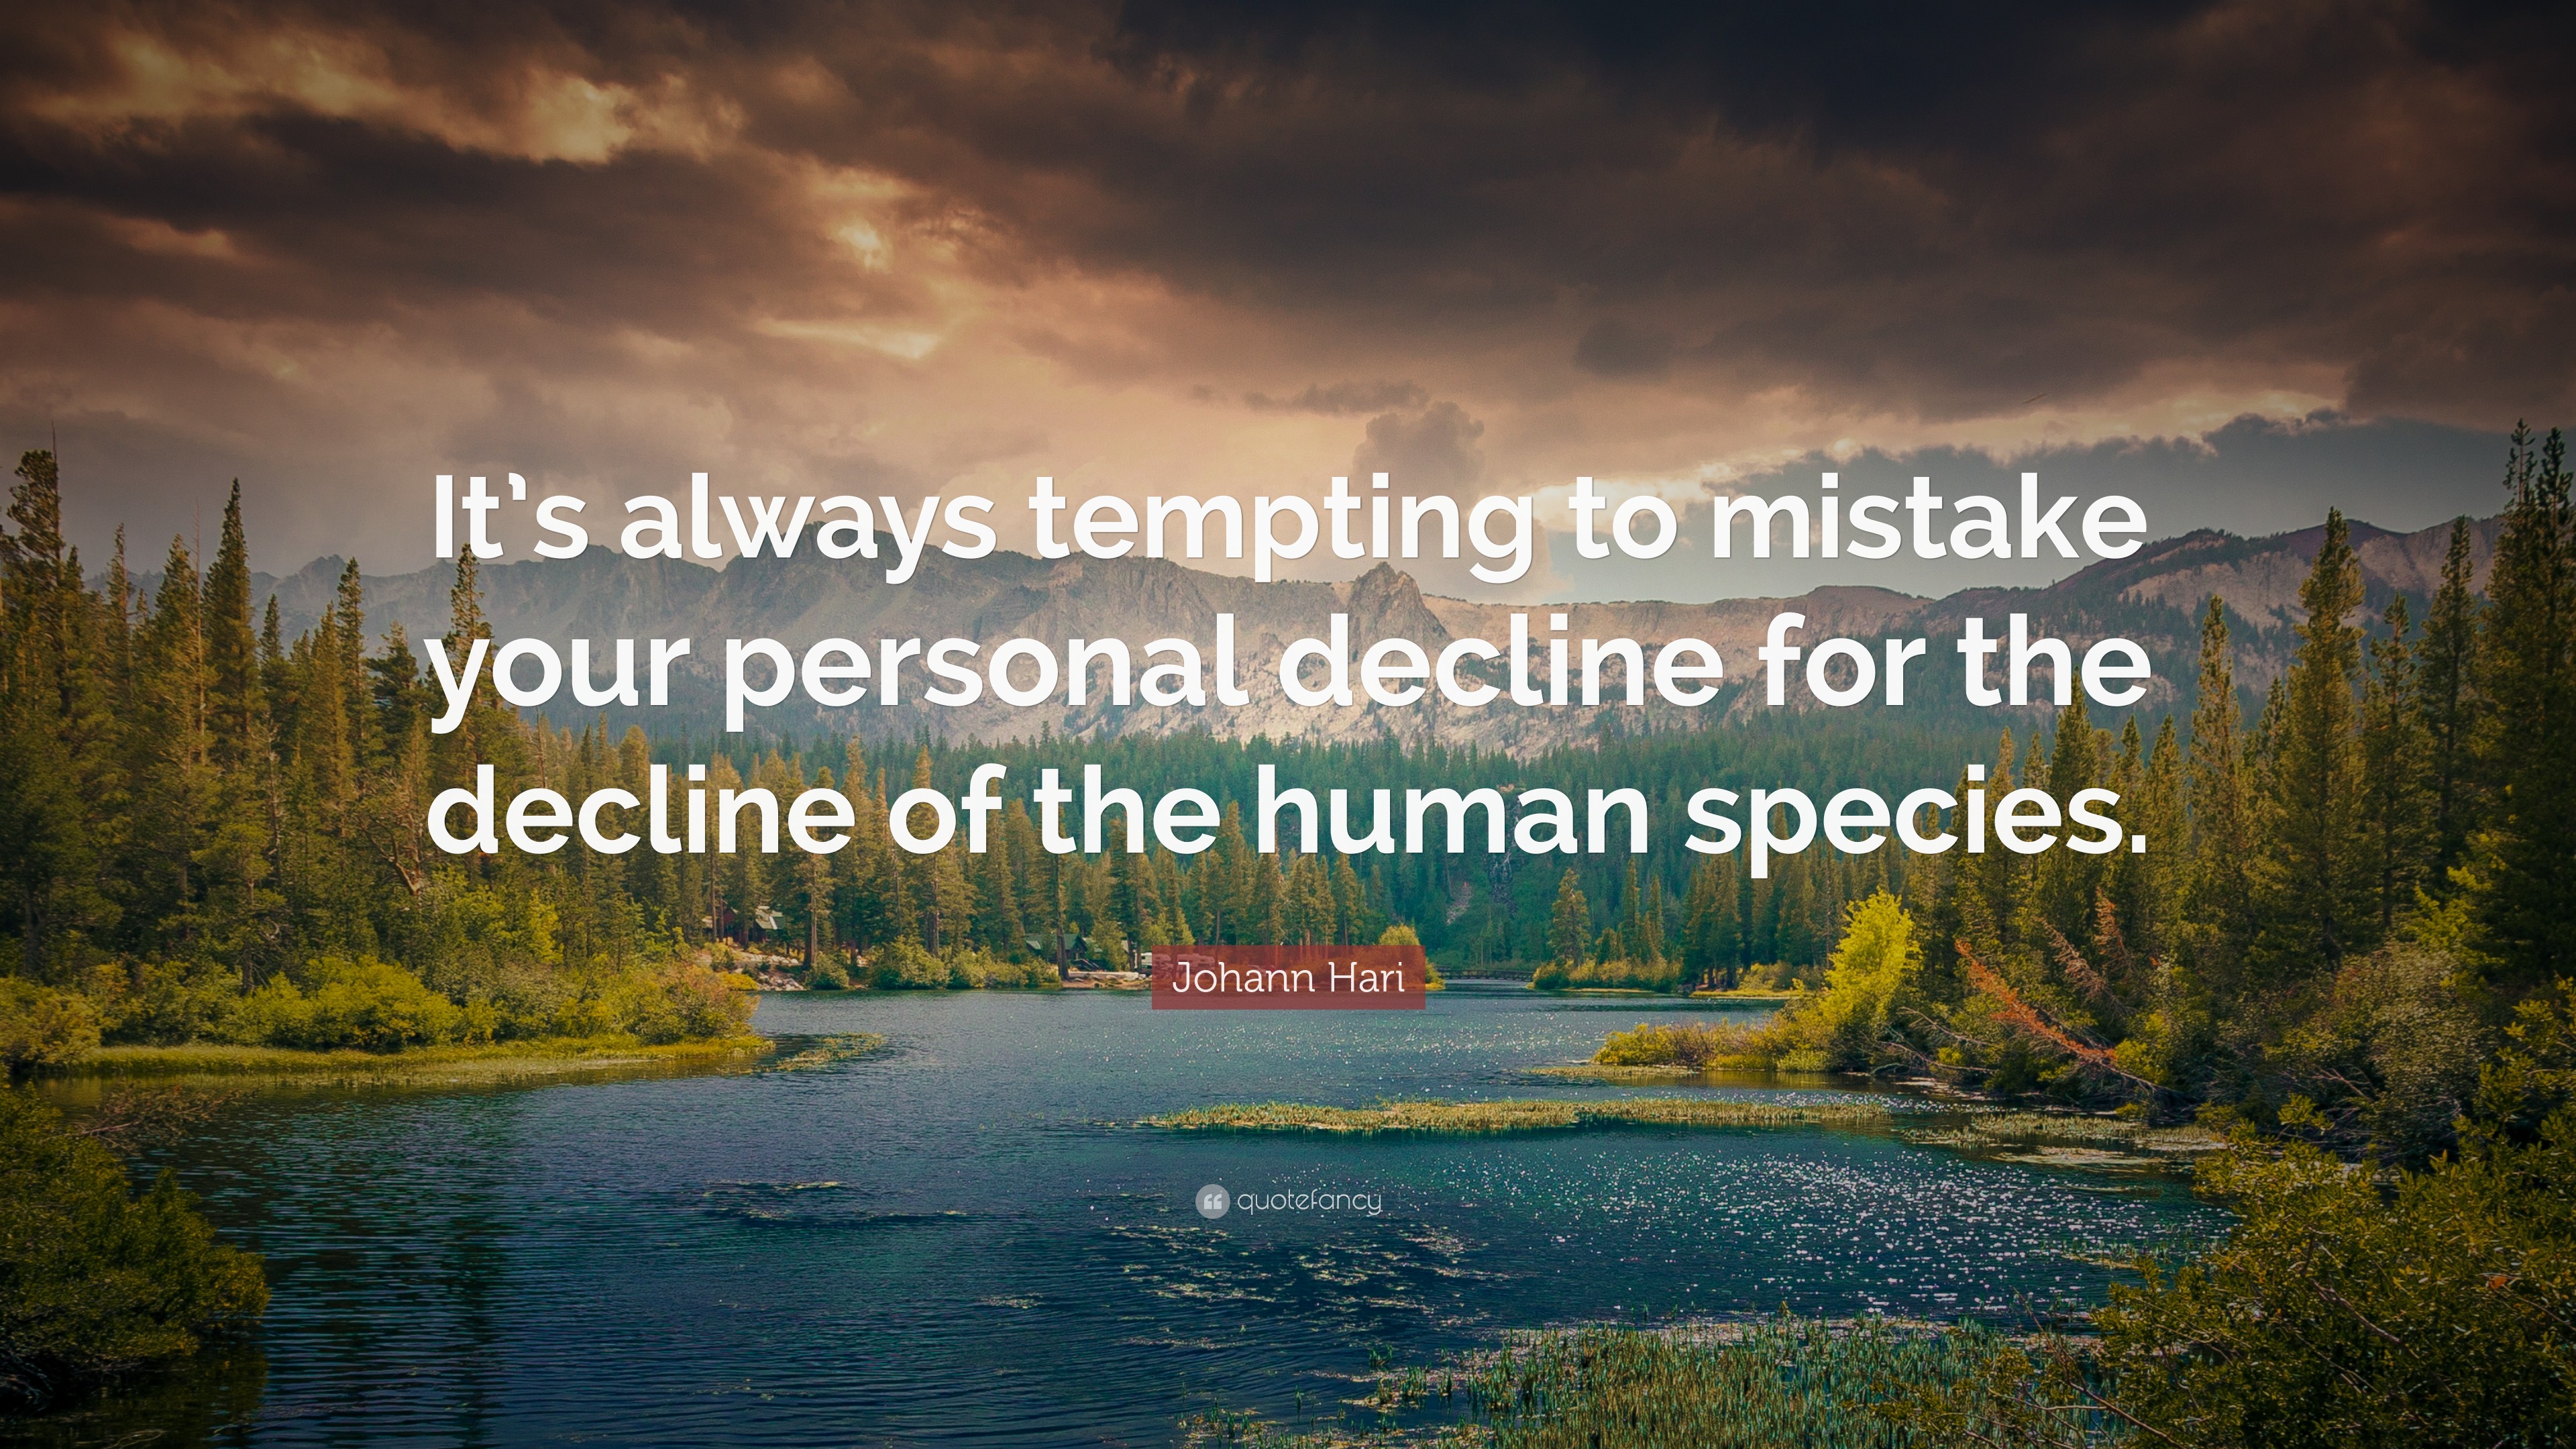 Johann Hari Quote: “It’s always tempting to mistake your personal ...